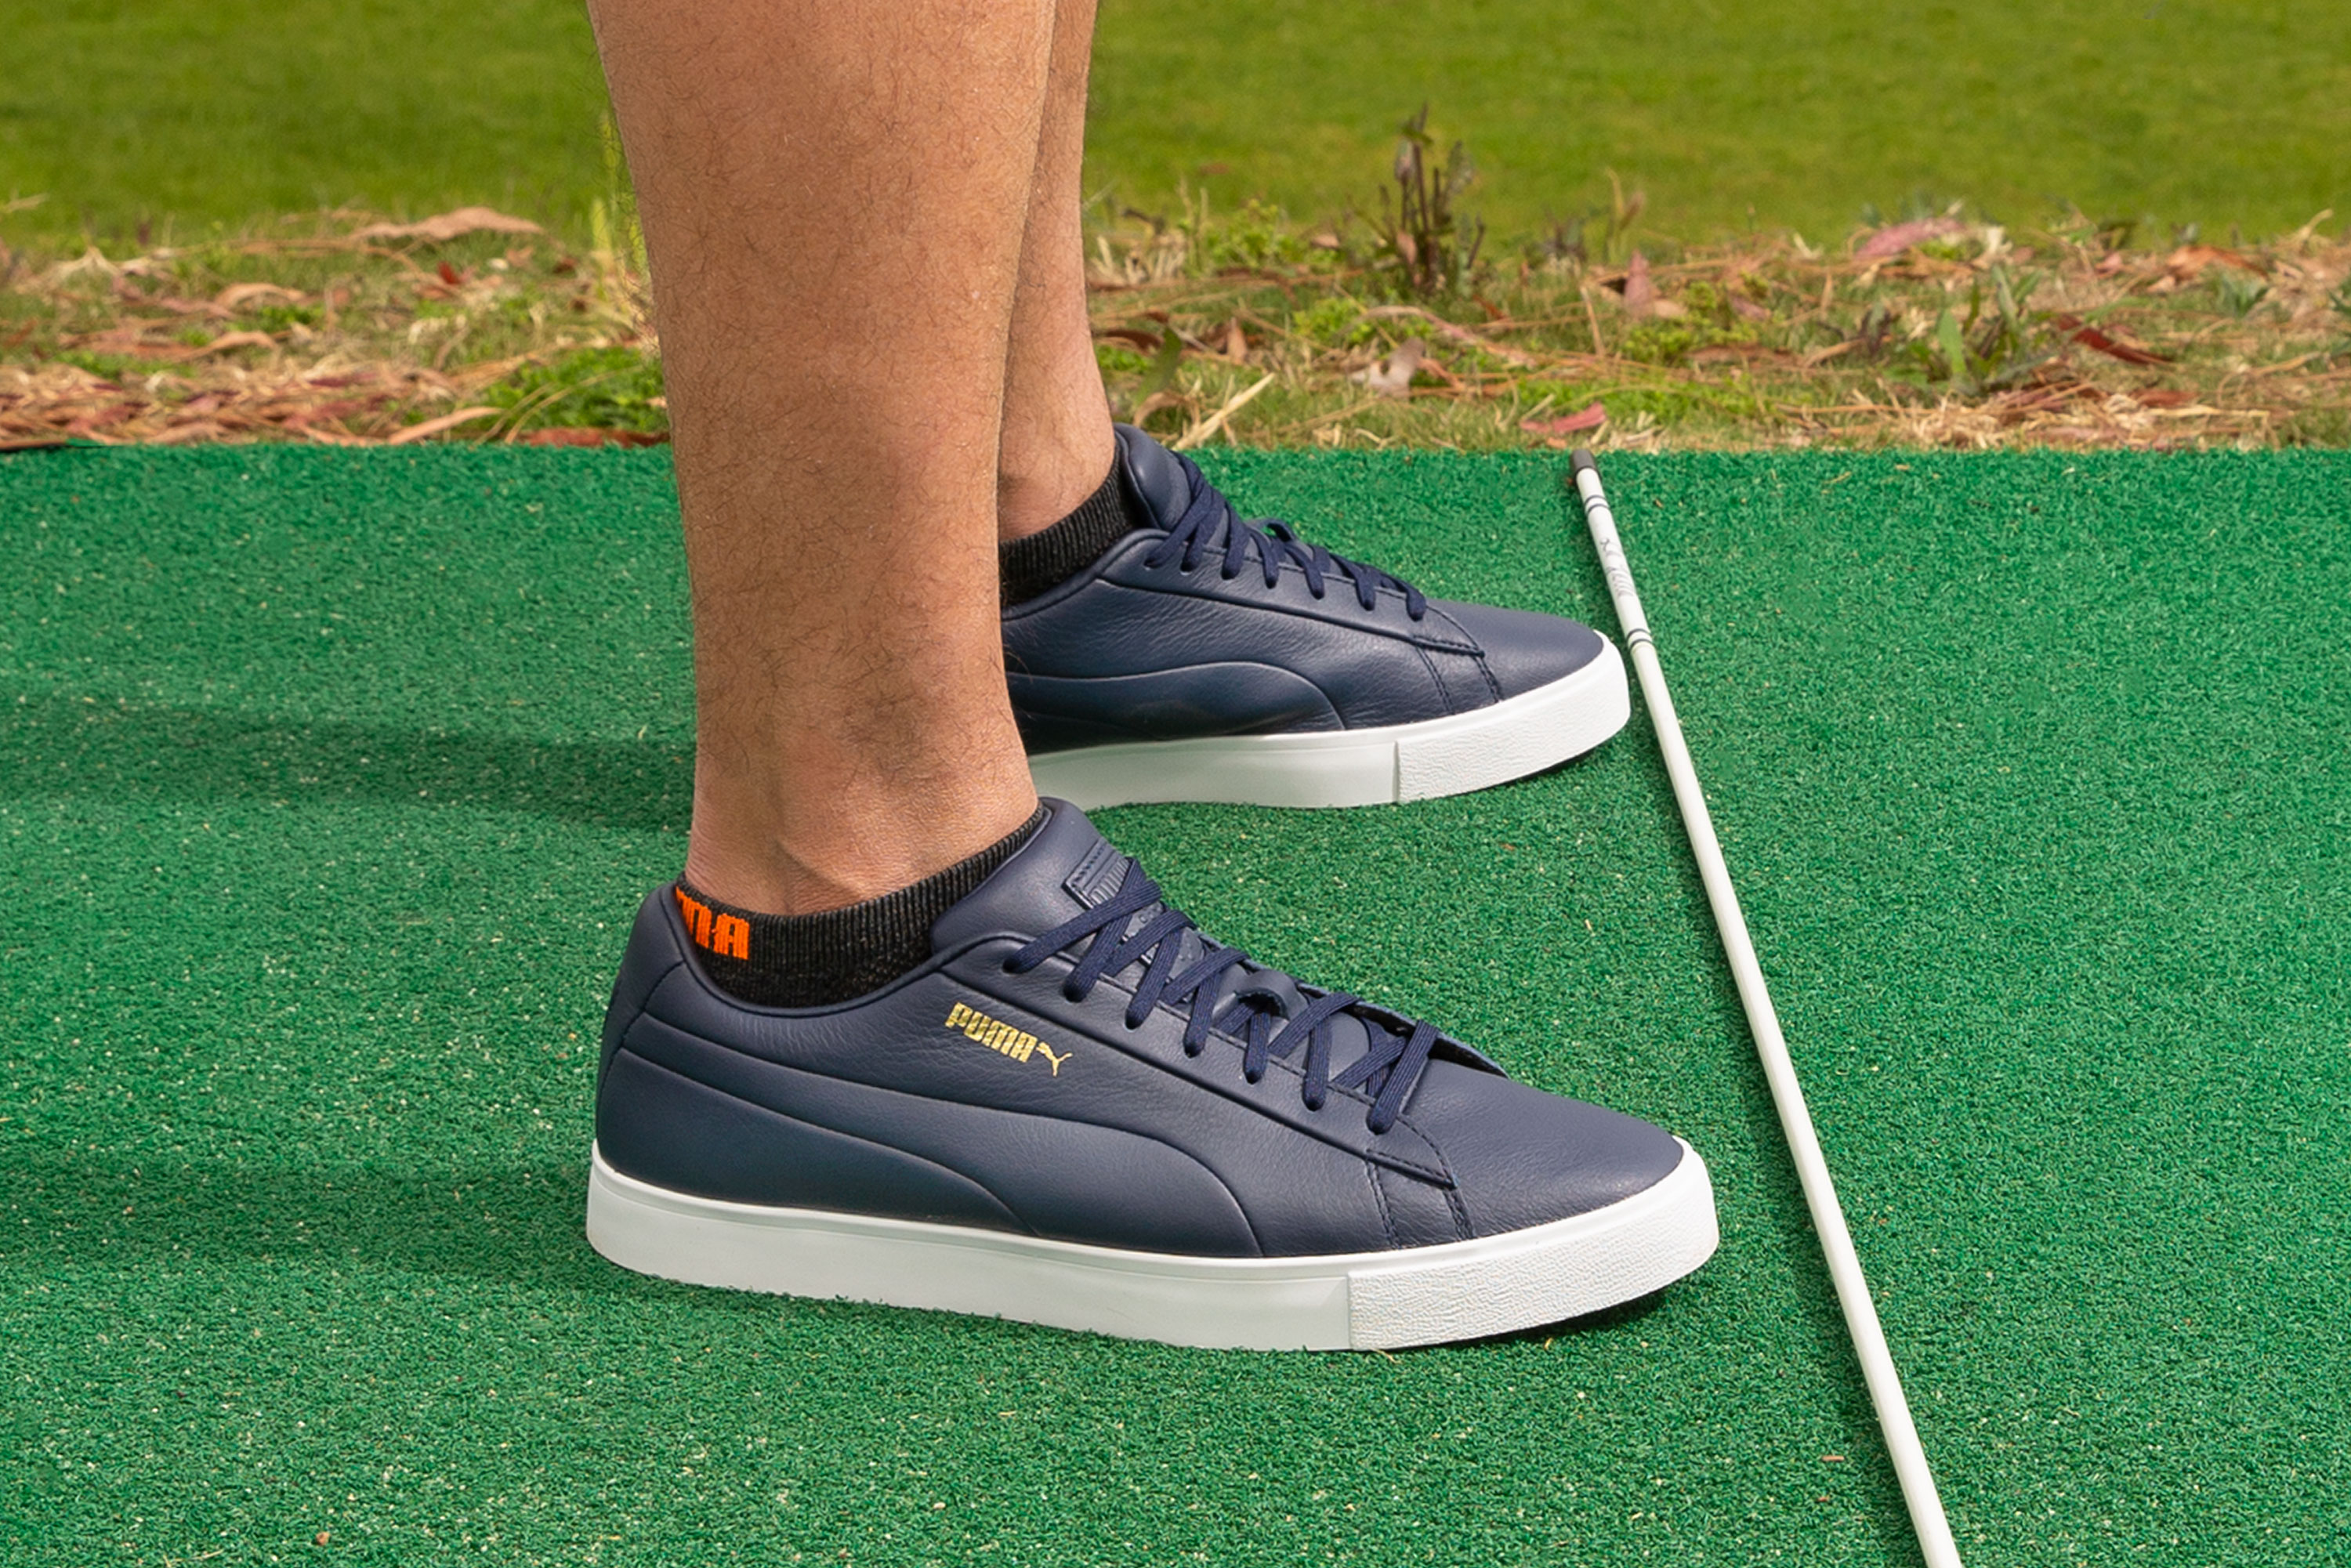 PUMA Golf Launches New Styles in the Brand’s Iconic Suede Shoes